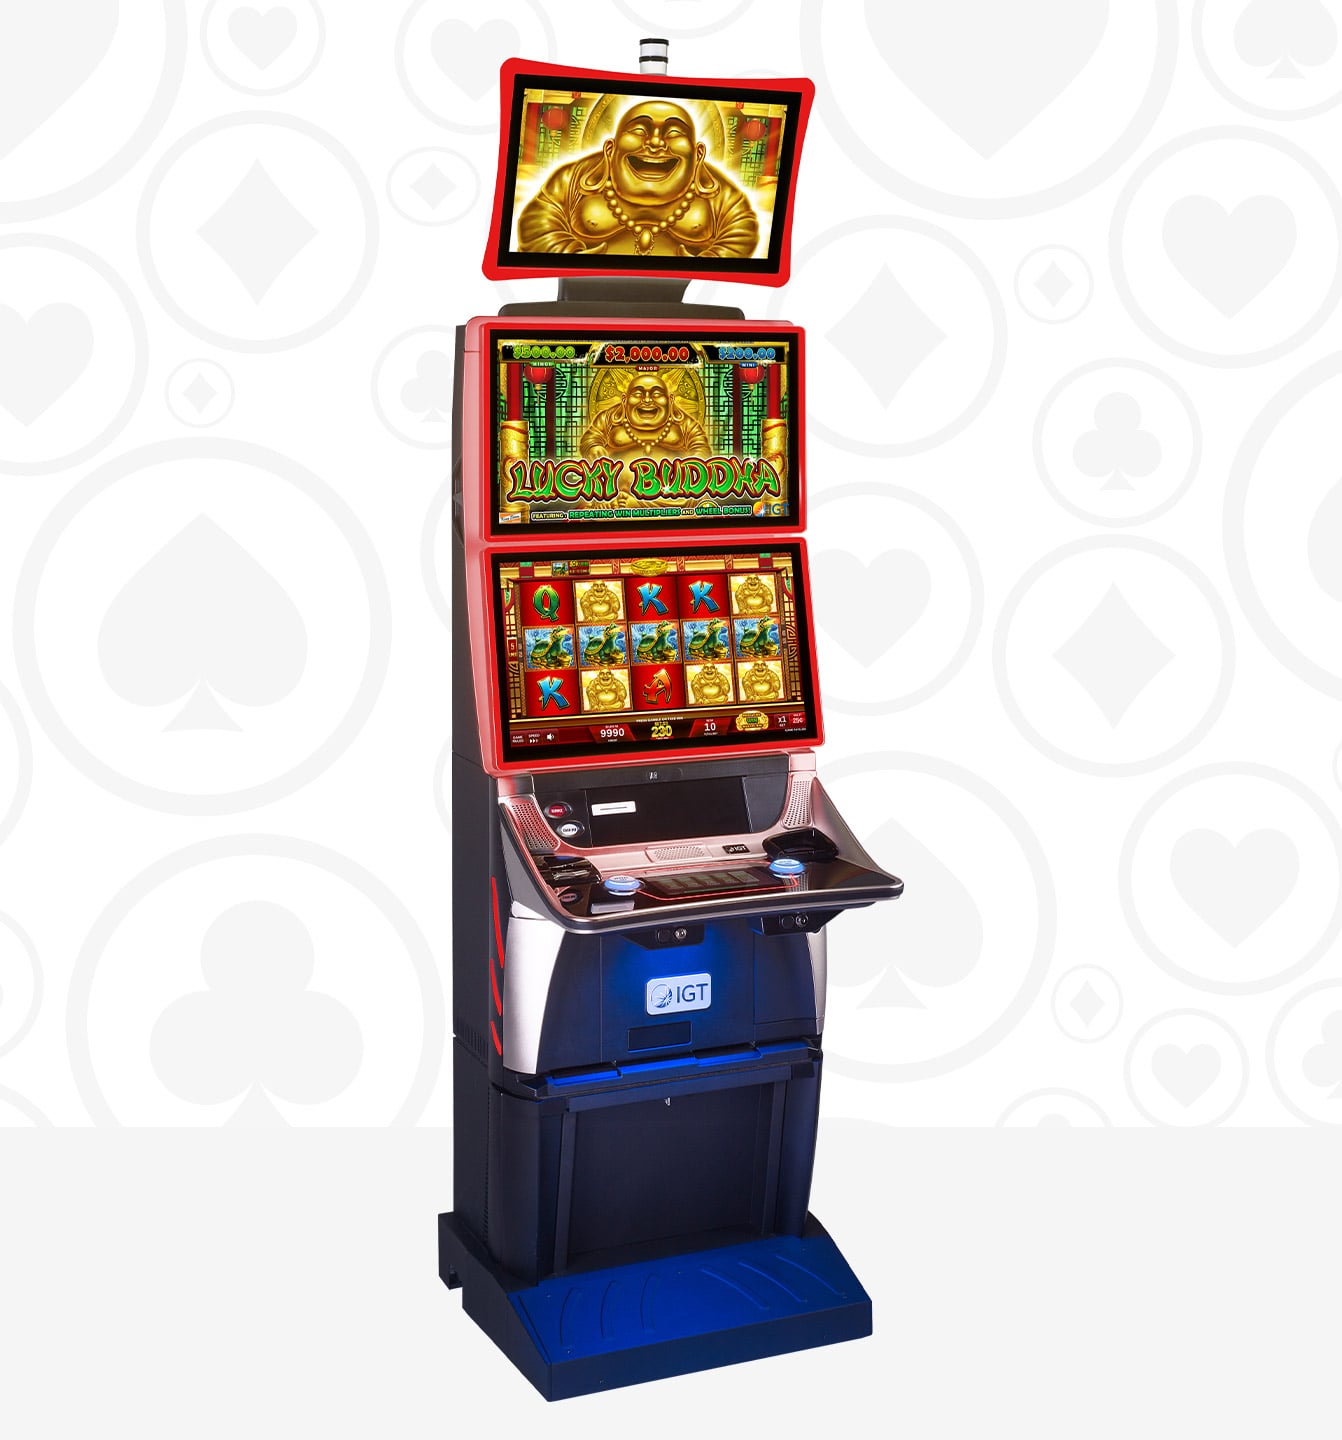 diamond cash: oasis riches slot machines online drawing